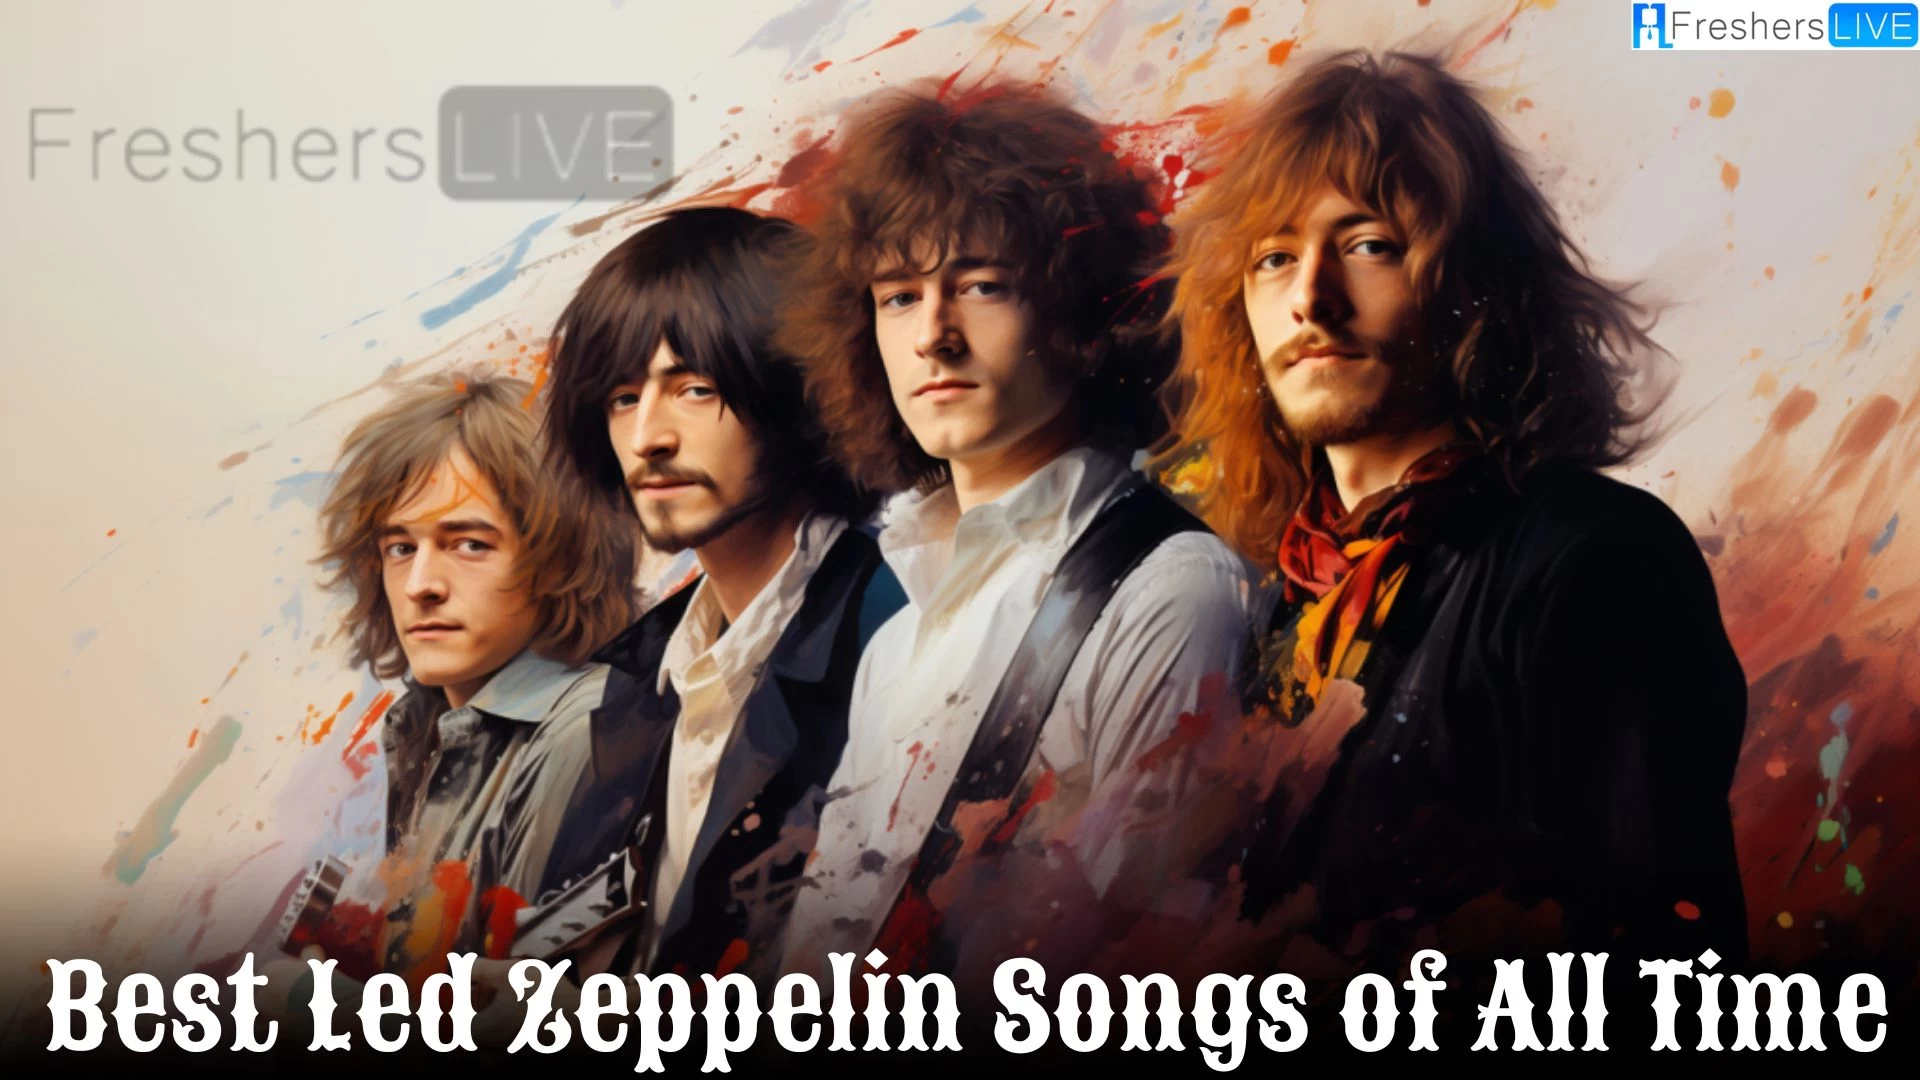 Best Led Zeppelin Songs of All Time - A Rock Odyssey